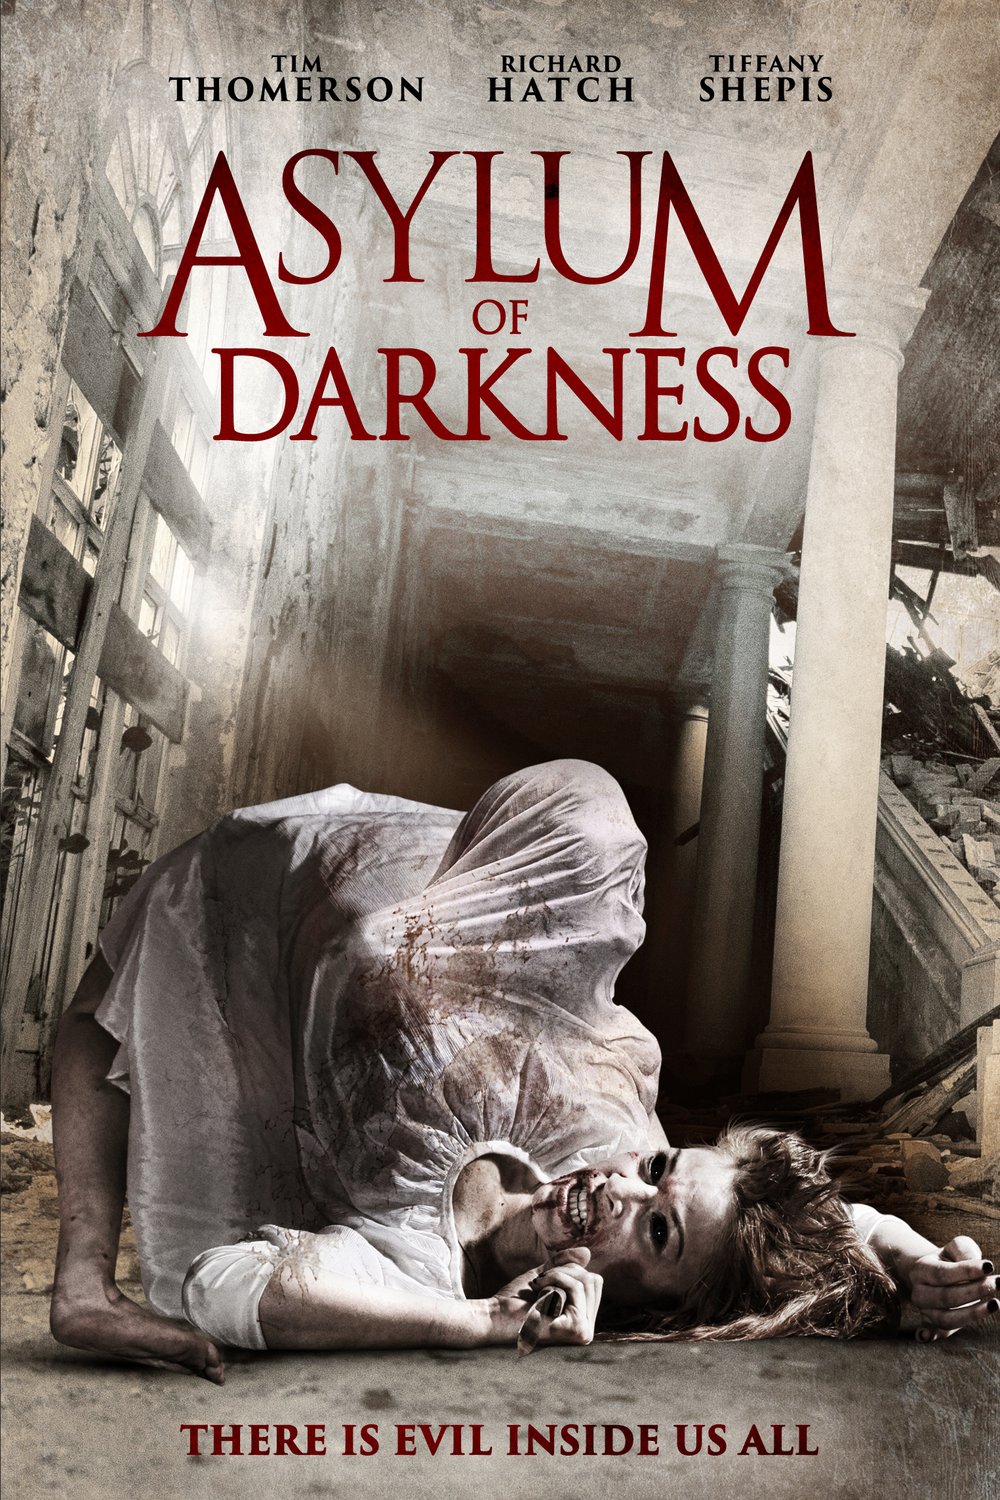 Poster of the movie Asylum of Darkness